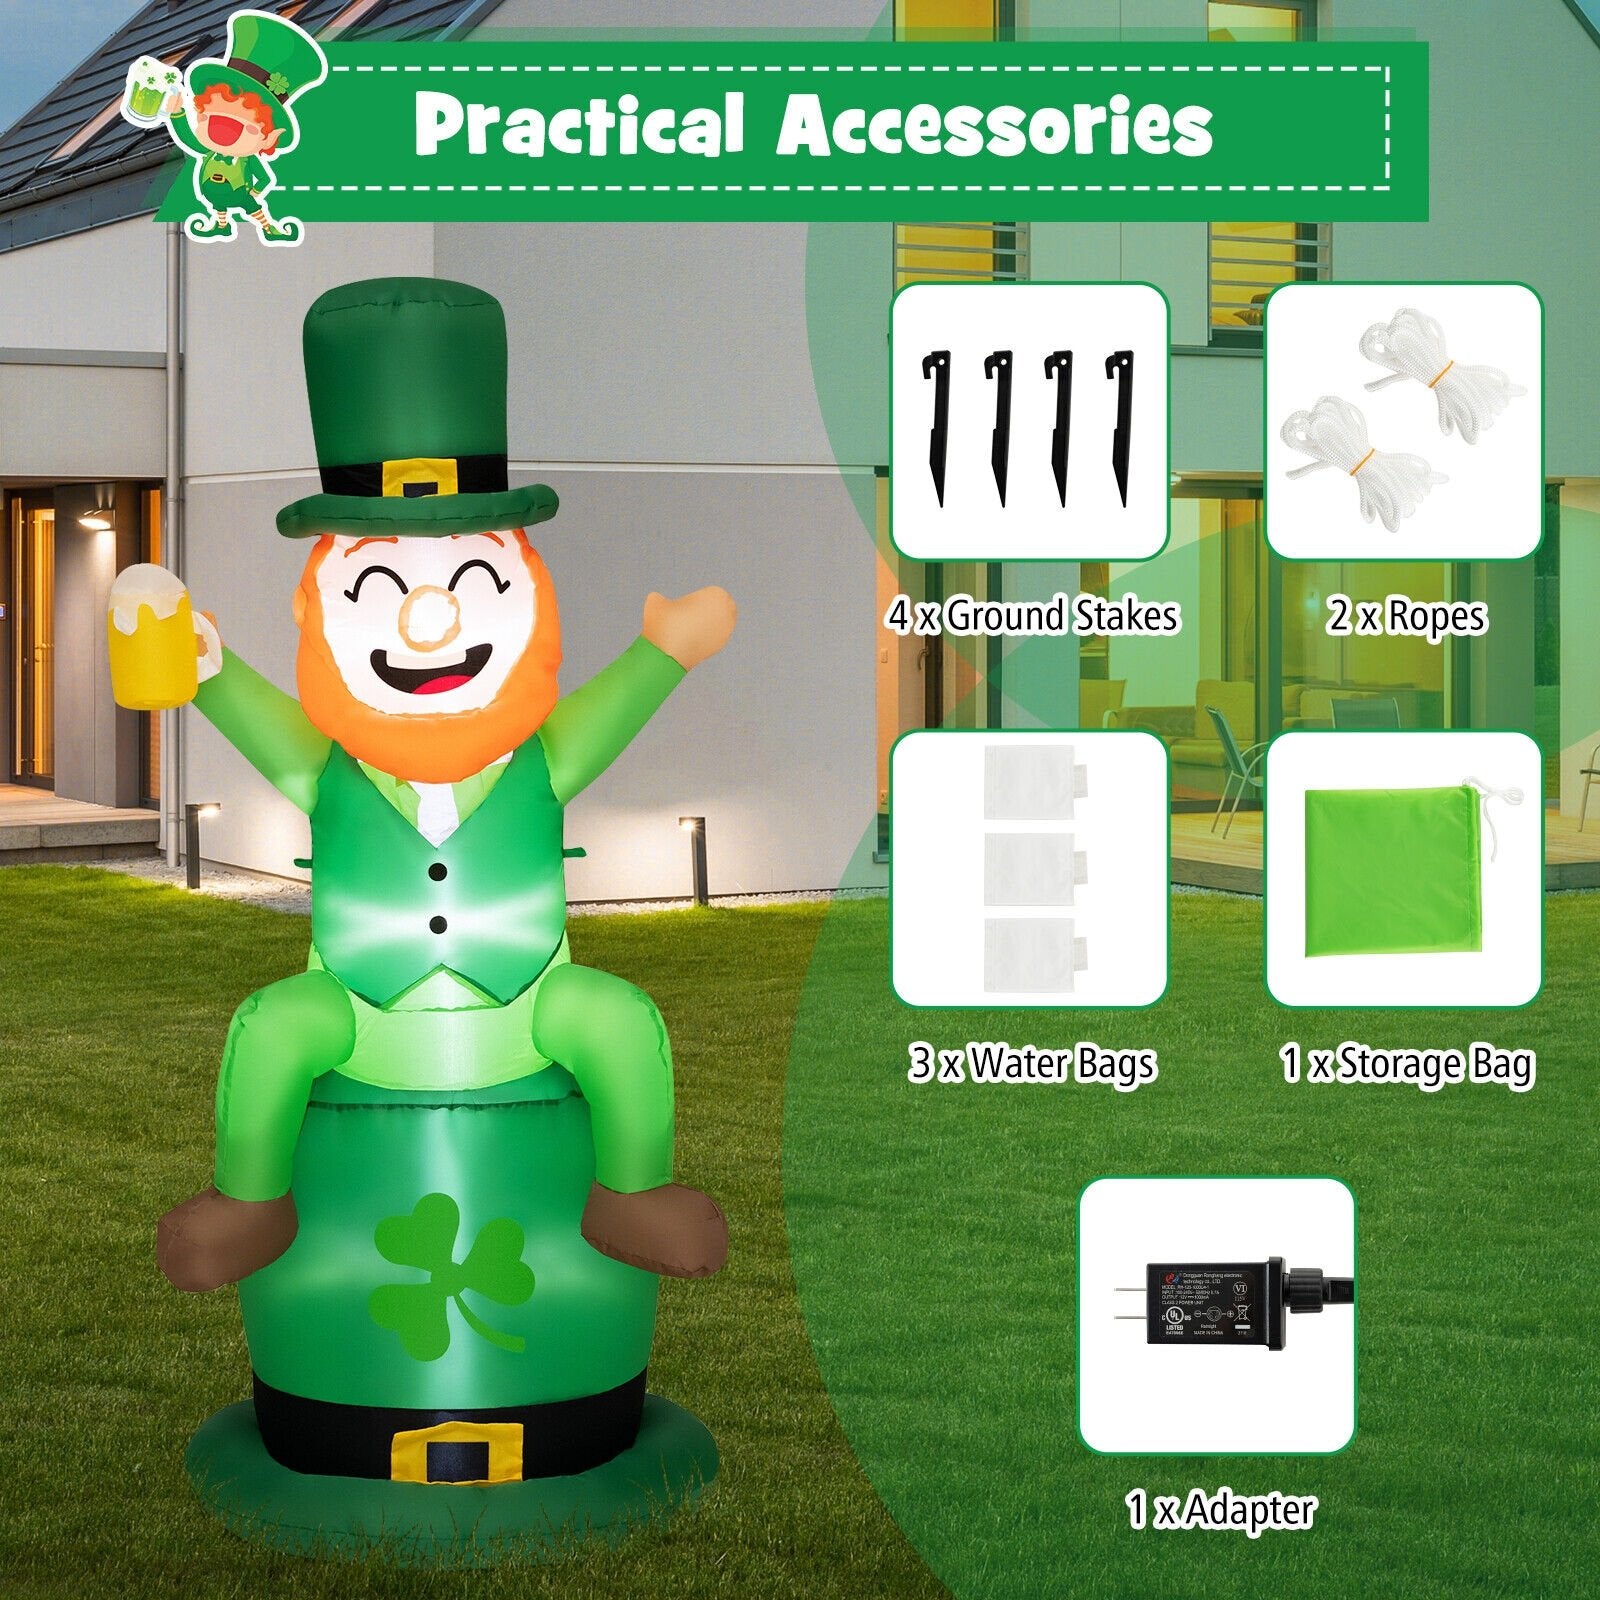 5 Feet St Patrick's Day Inflatable Decoration Leprechaun Sitting on Hat, Green - Gallery Canada